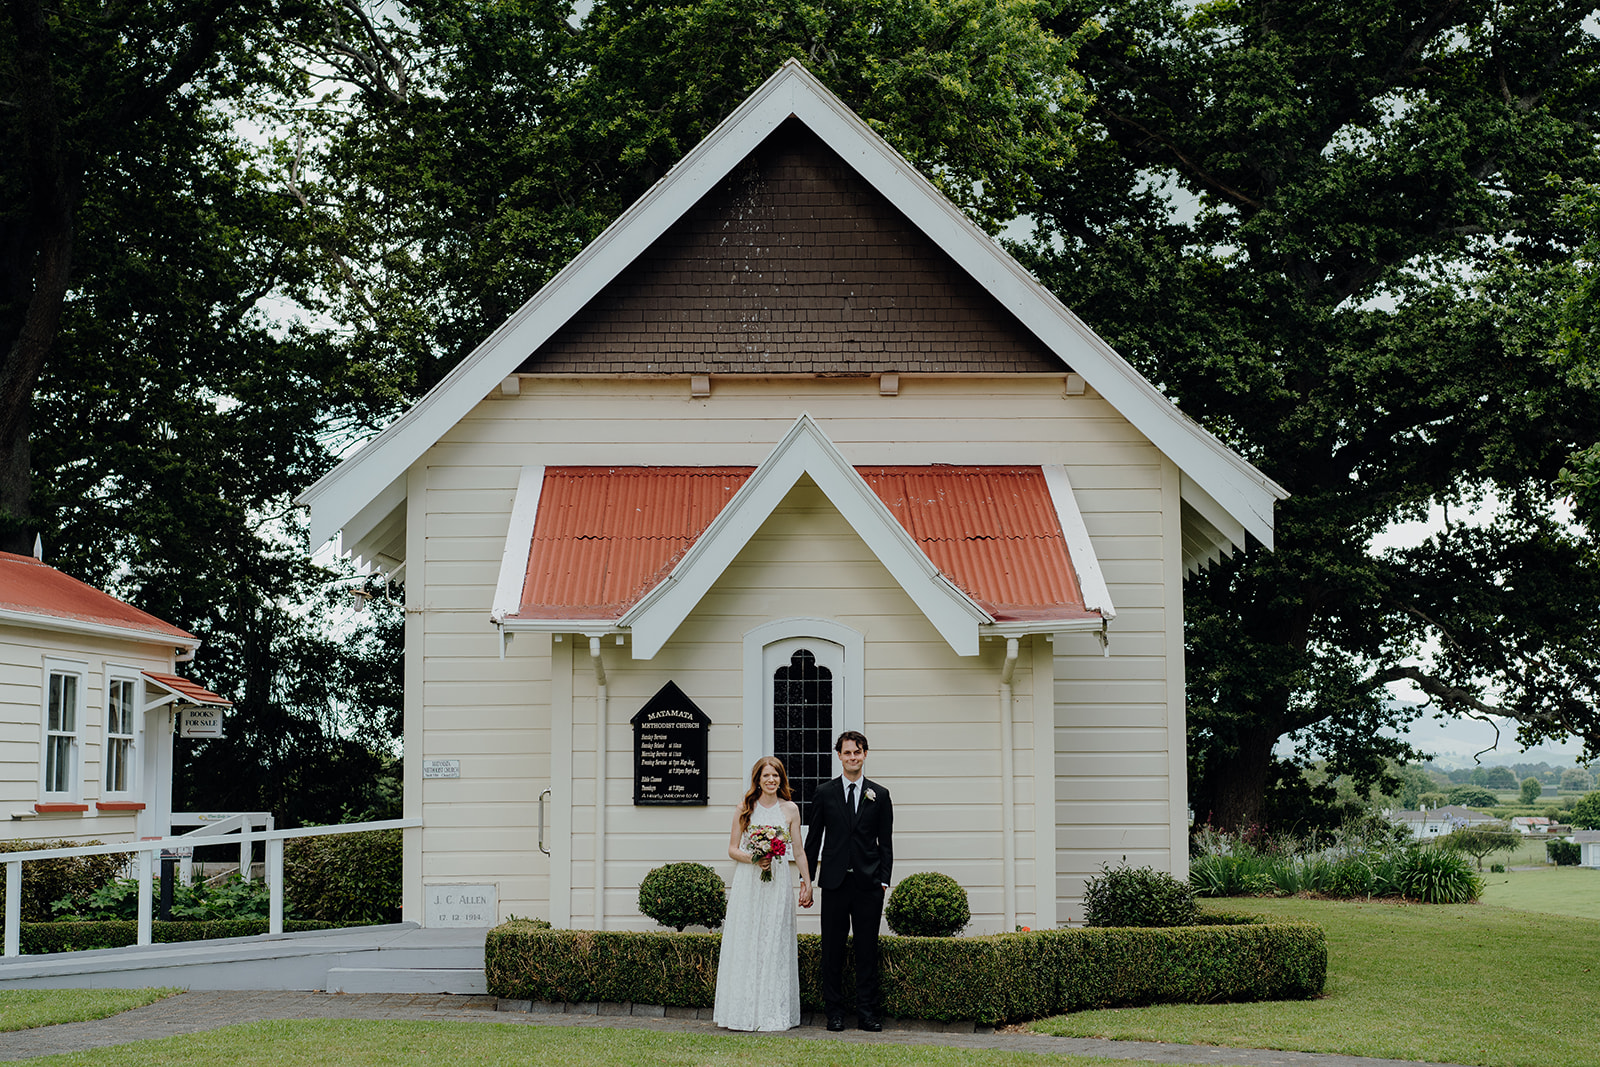 A bride and groom standing in front of the church at the Firth Tower and Museum, a Matamata Wedding Venue being photographed by Waikato Photographer Haley Adele Photography